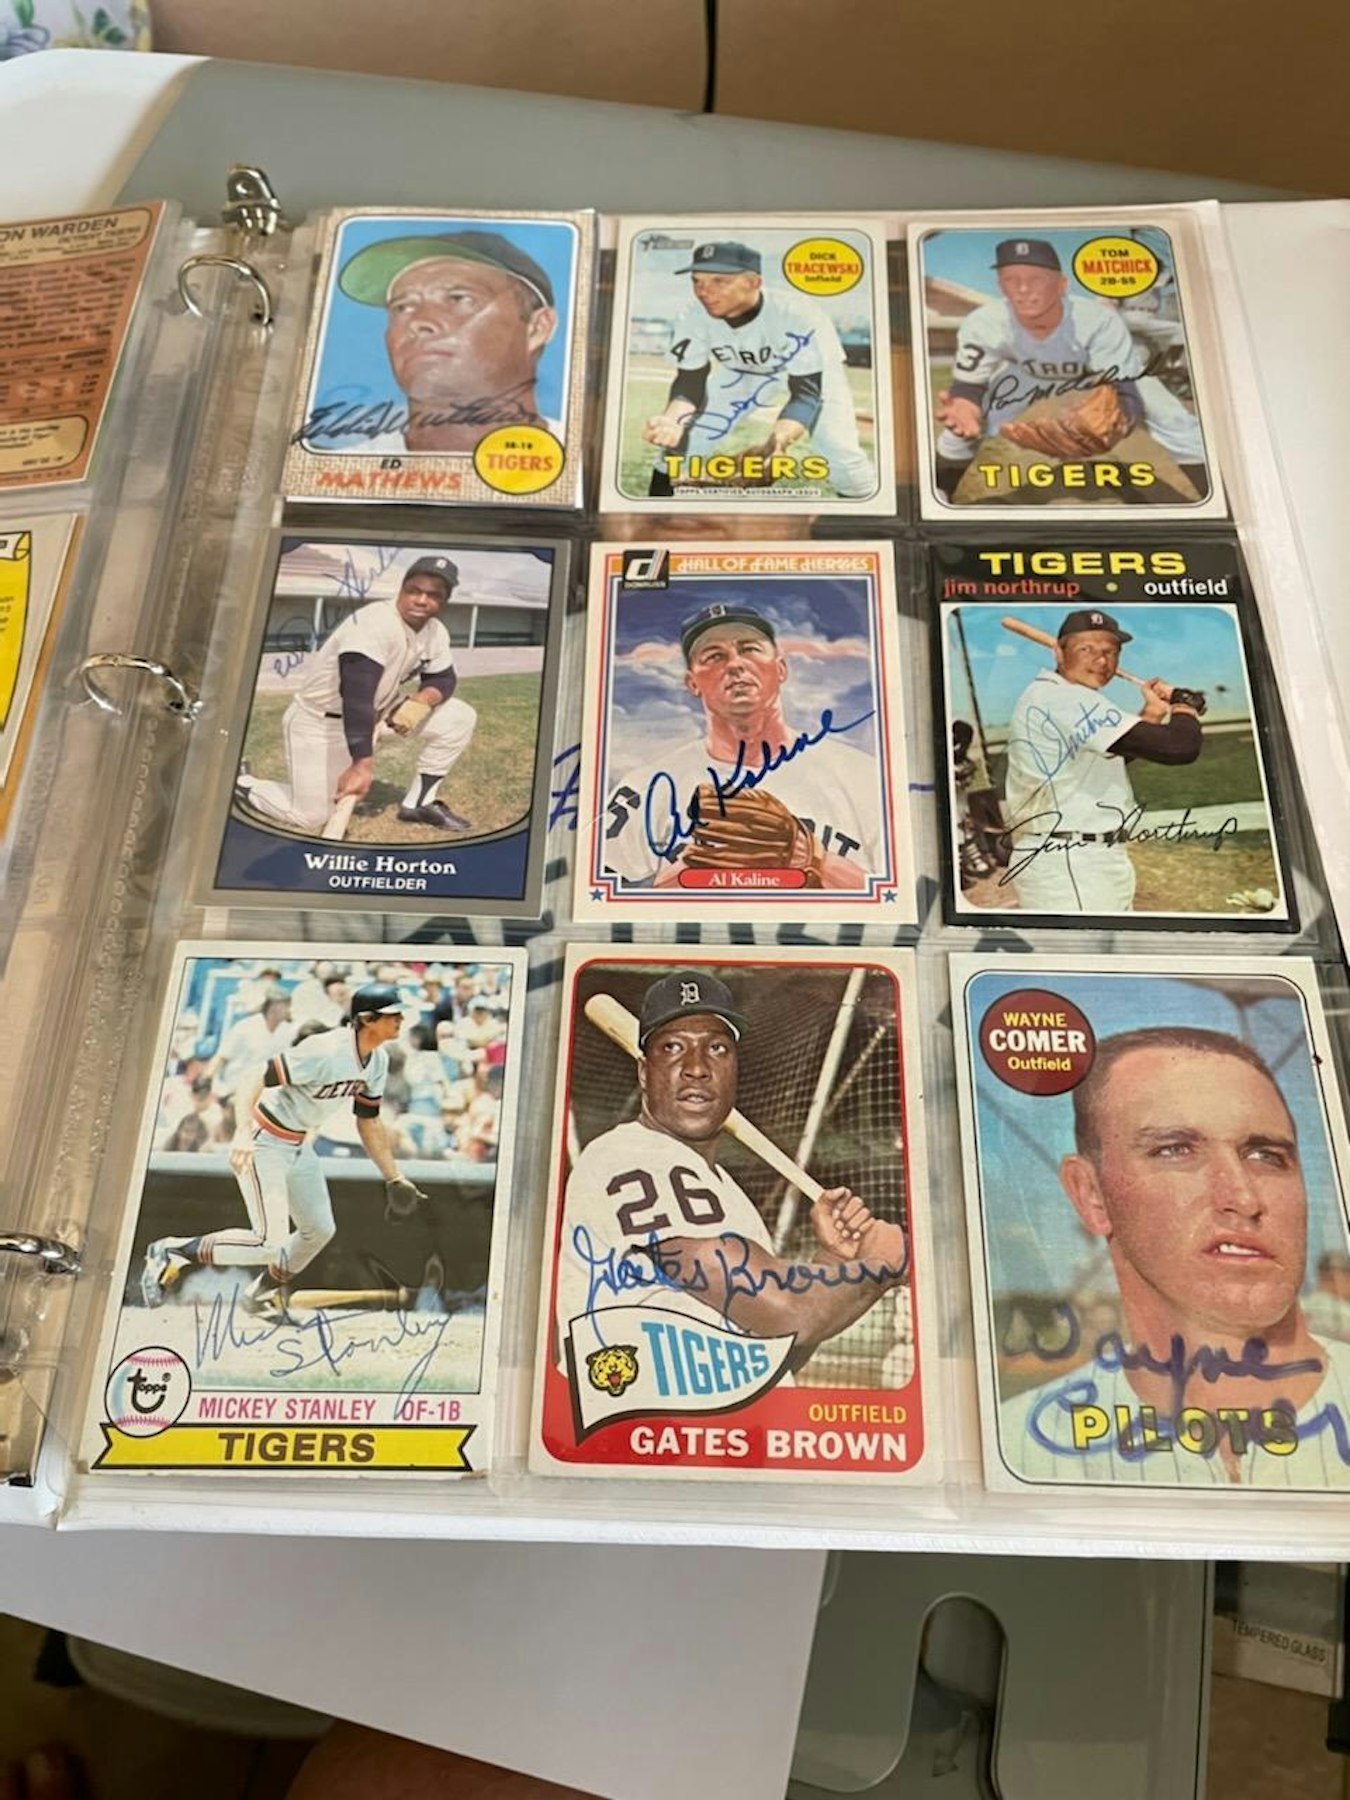 Cards That Never Were: 1968 Detroit Tigers - By Request